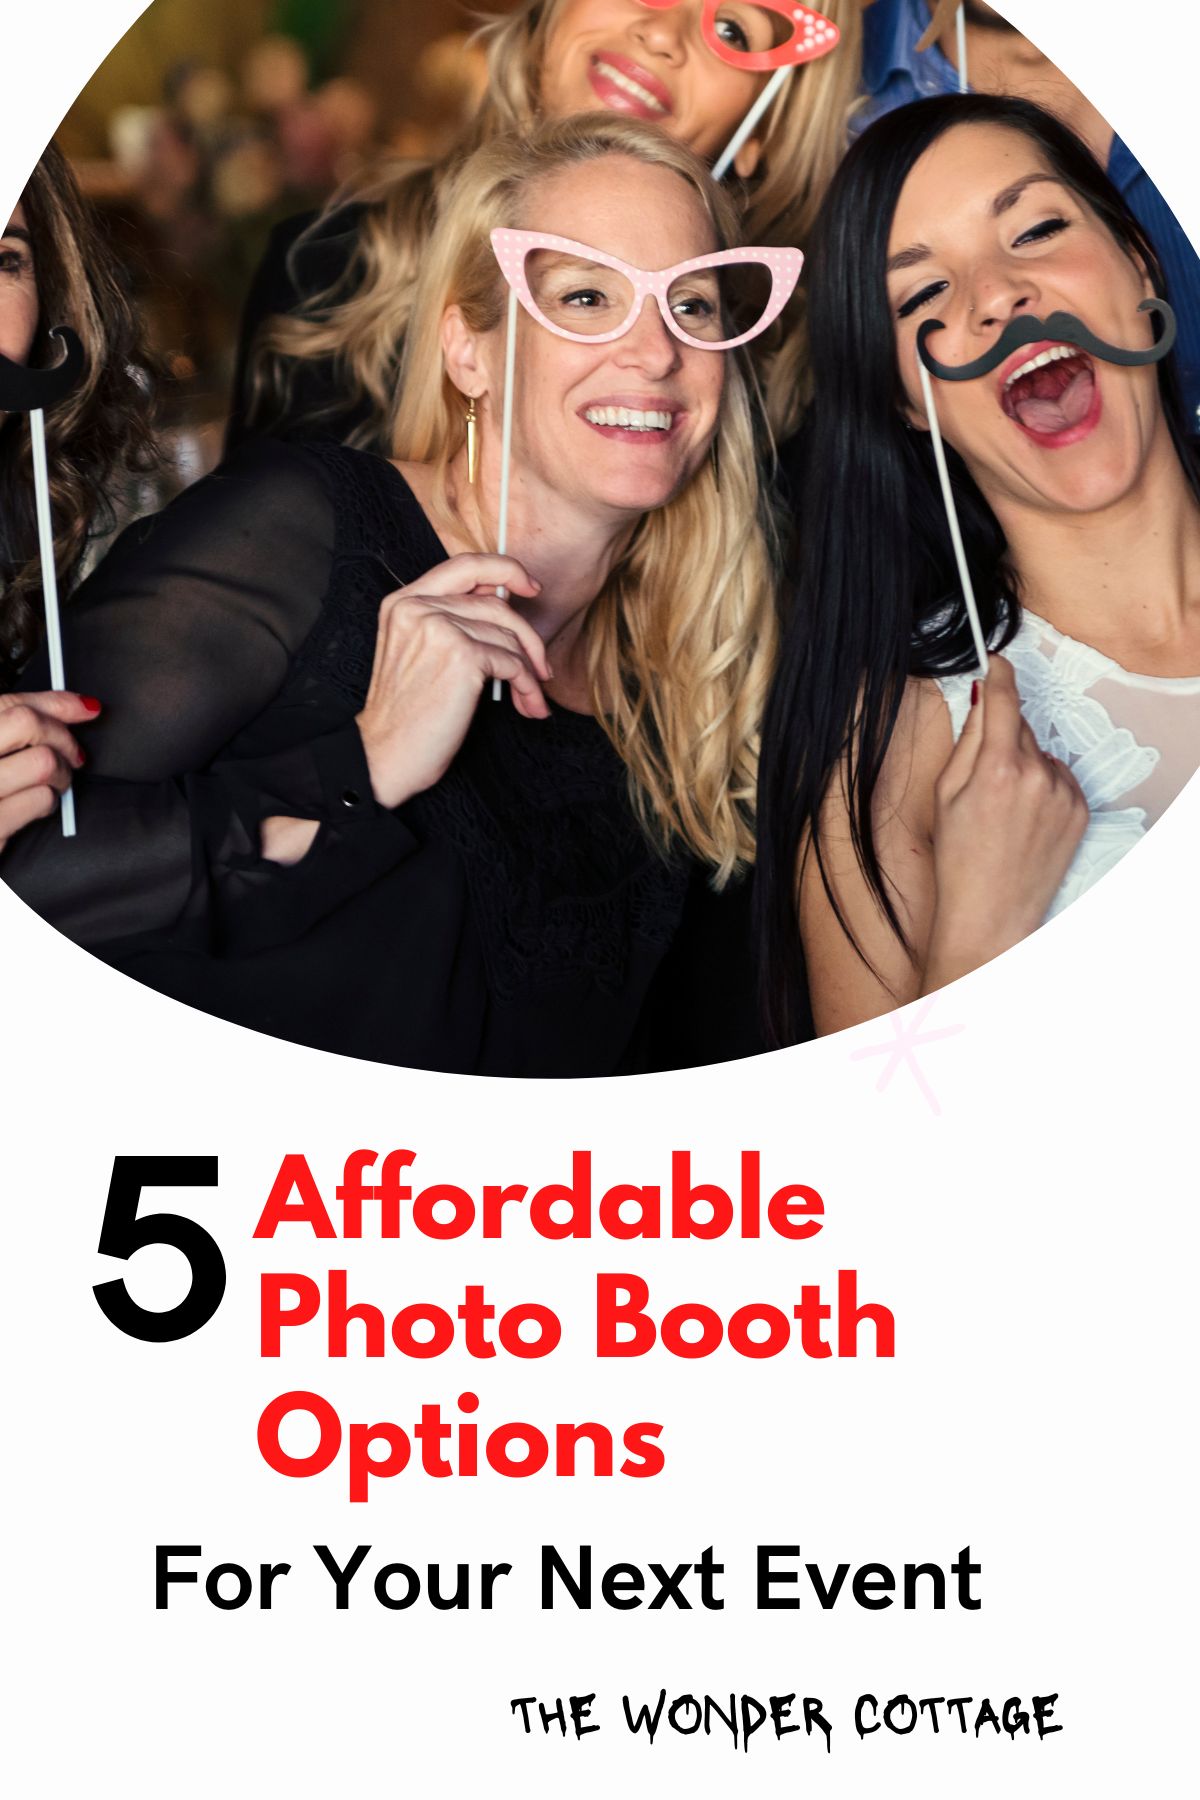 5 Affordable Photo Booth Options for Your Next Event